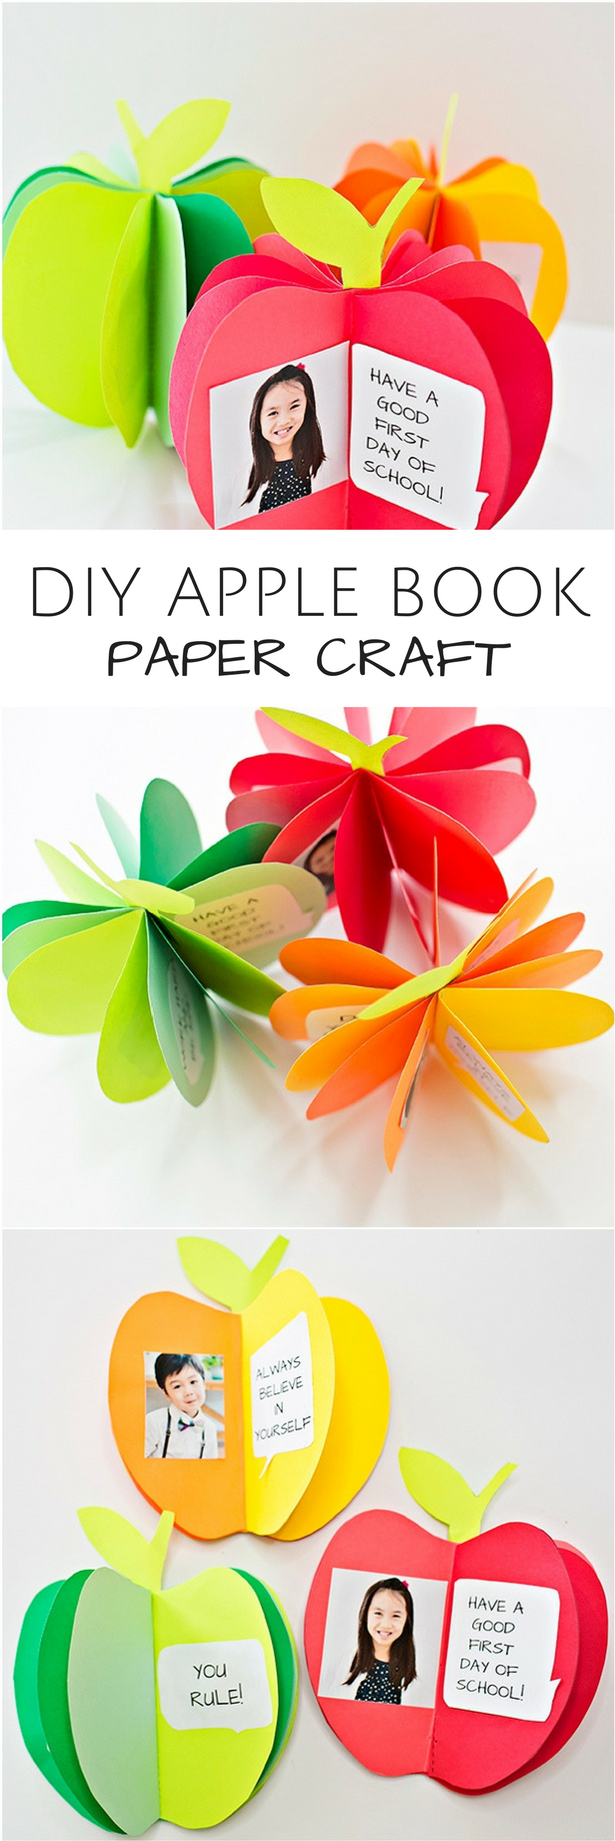 DIY 3D Apple Book Paper Craft. Cute back to school craft for kids or fall autumn art project. Free printable templates included.